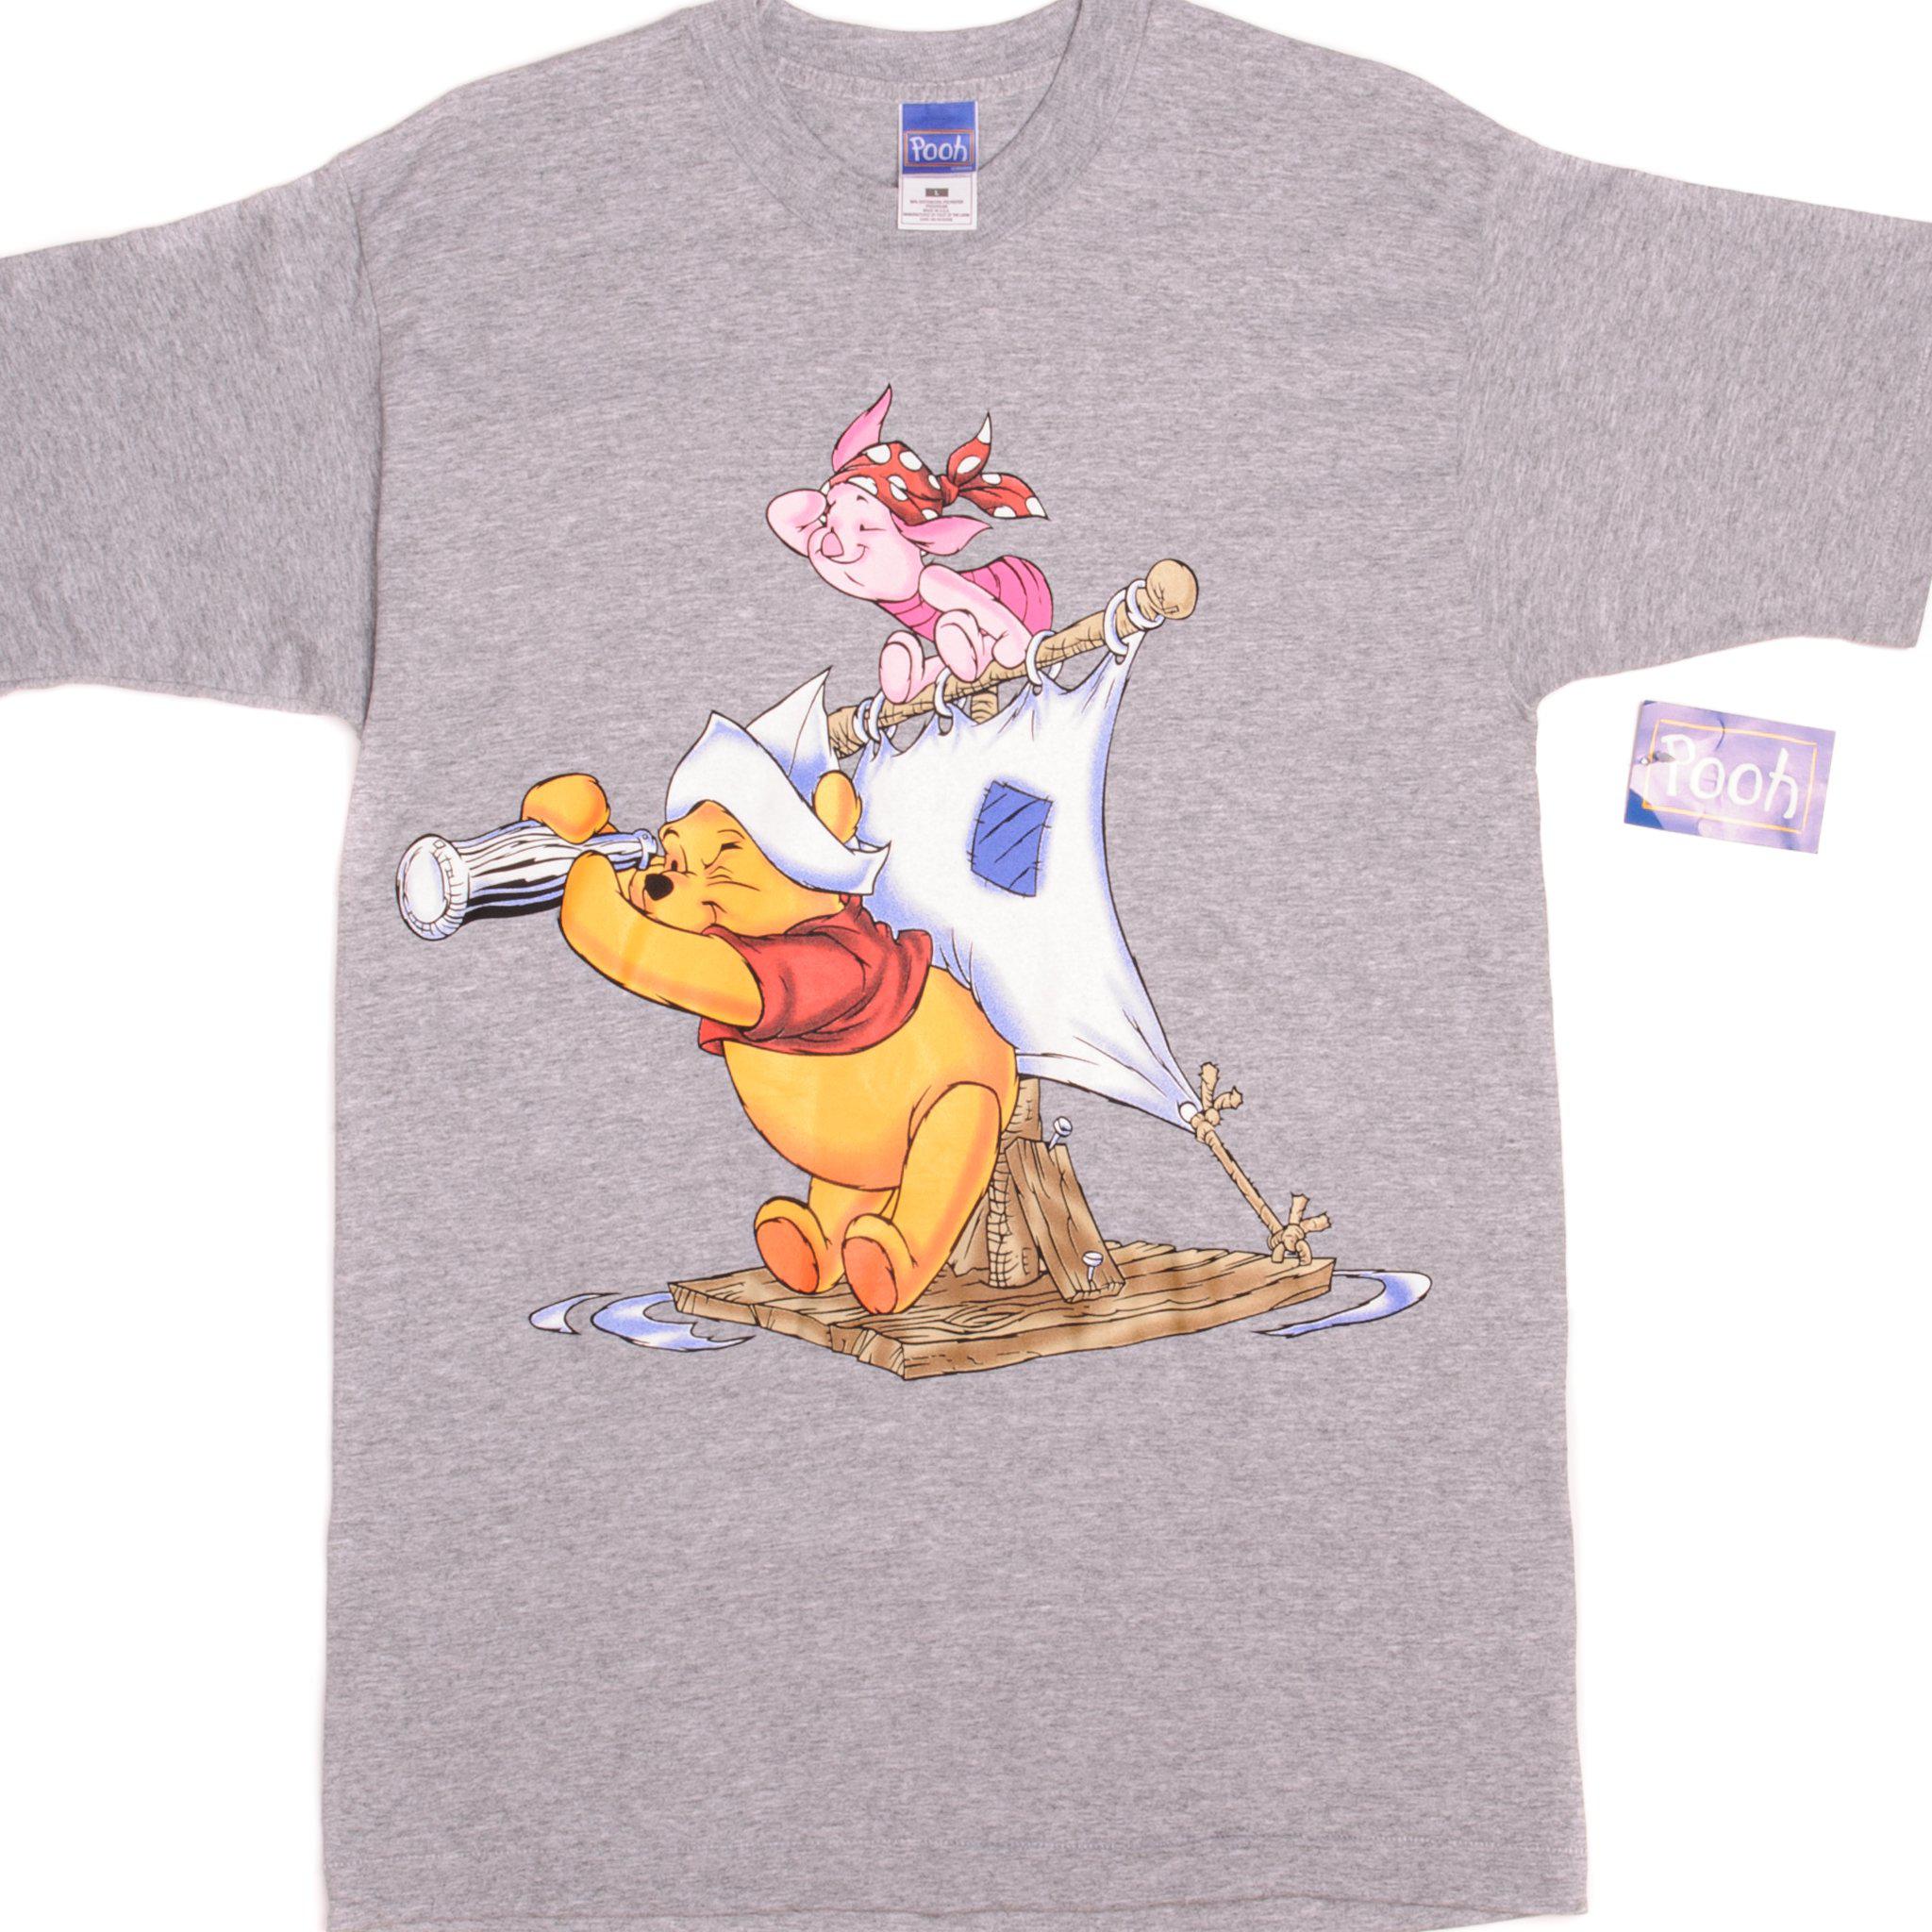 VINTAGE DISNEY WINNIE THE POOH TEE SHIRT 90s SIZE LARGE MADE IN USA  DEADSTOCK